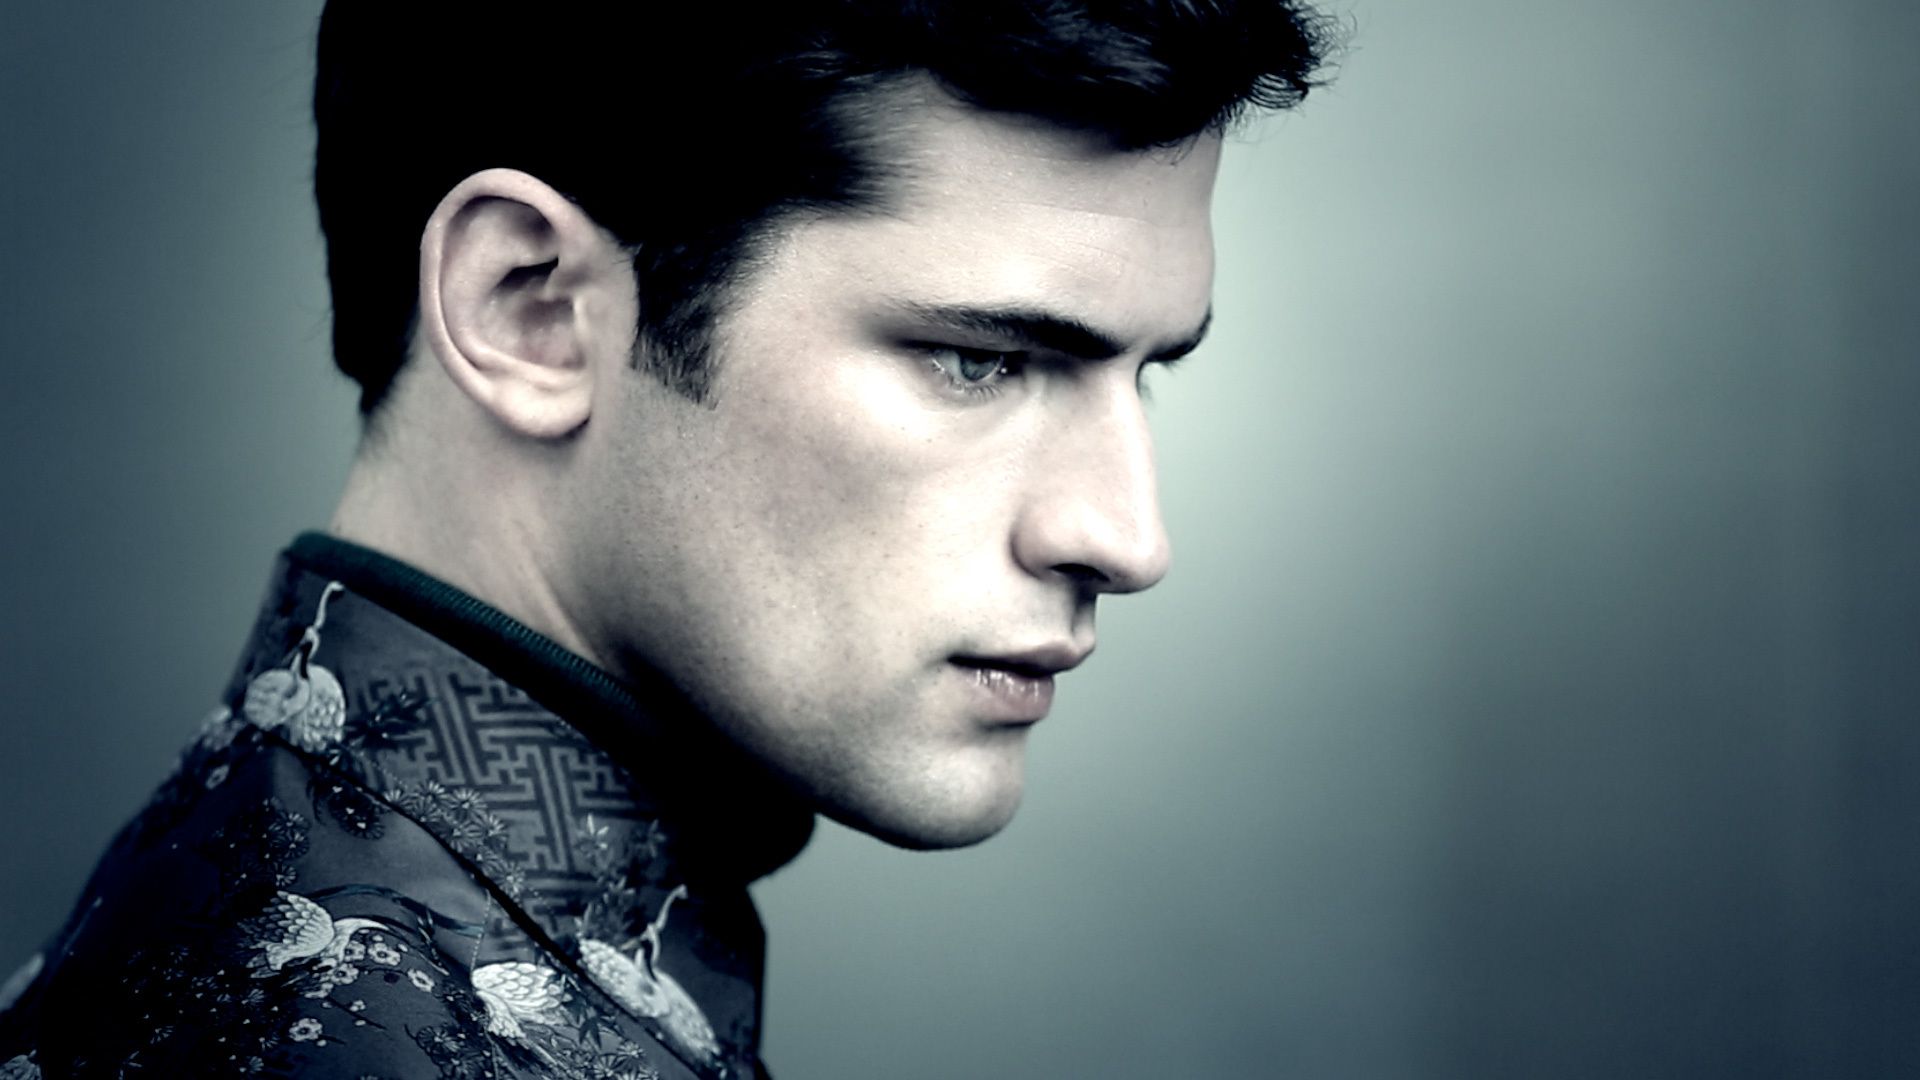 Sean O'Pry Wallpaper Image Photo Picture Background